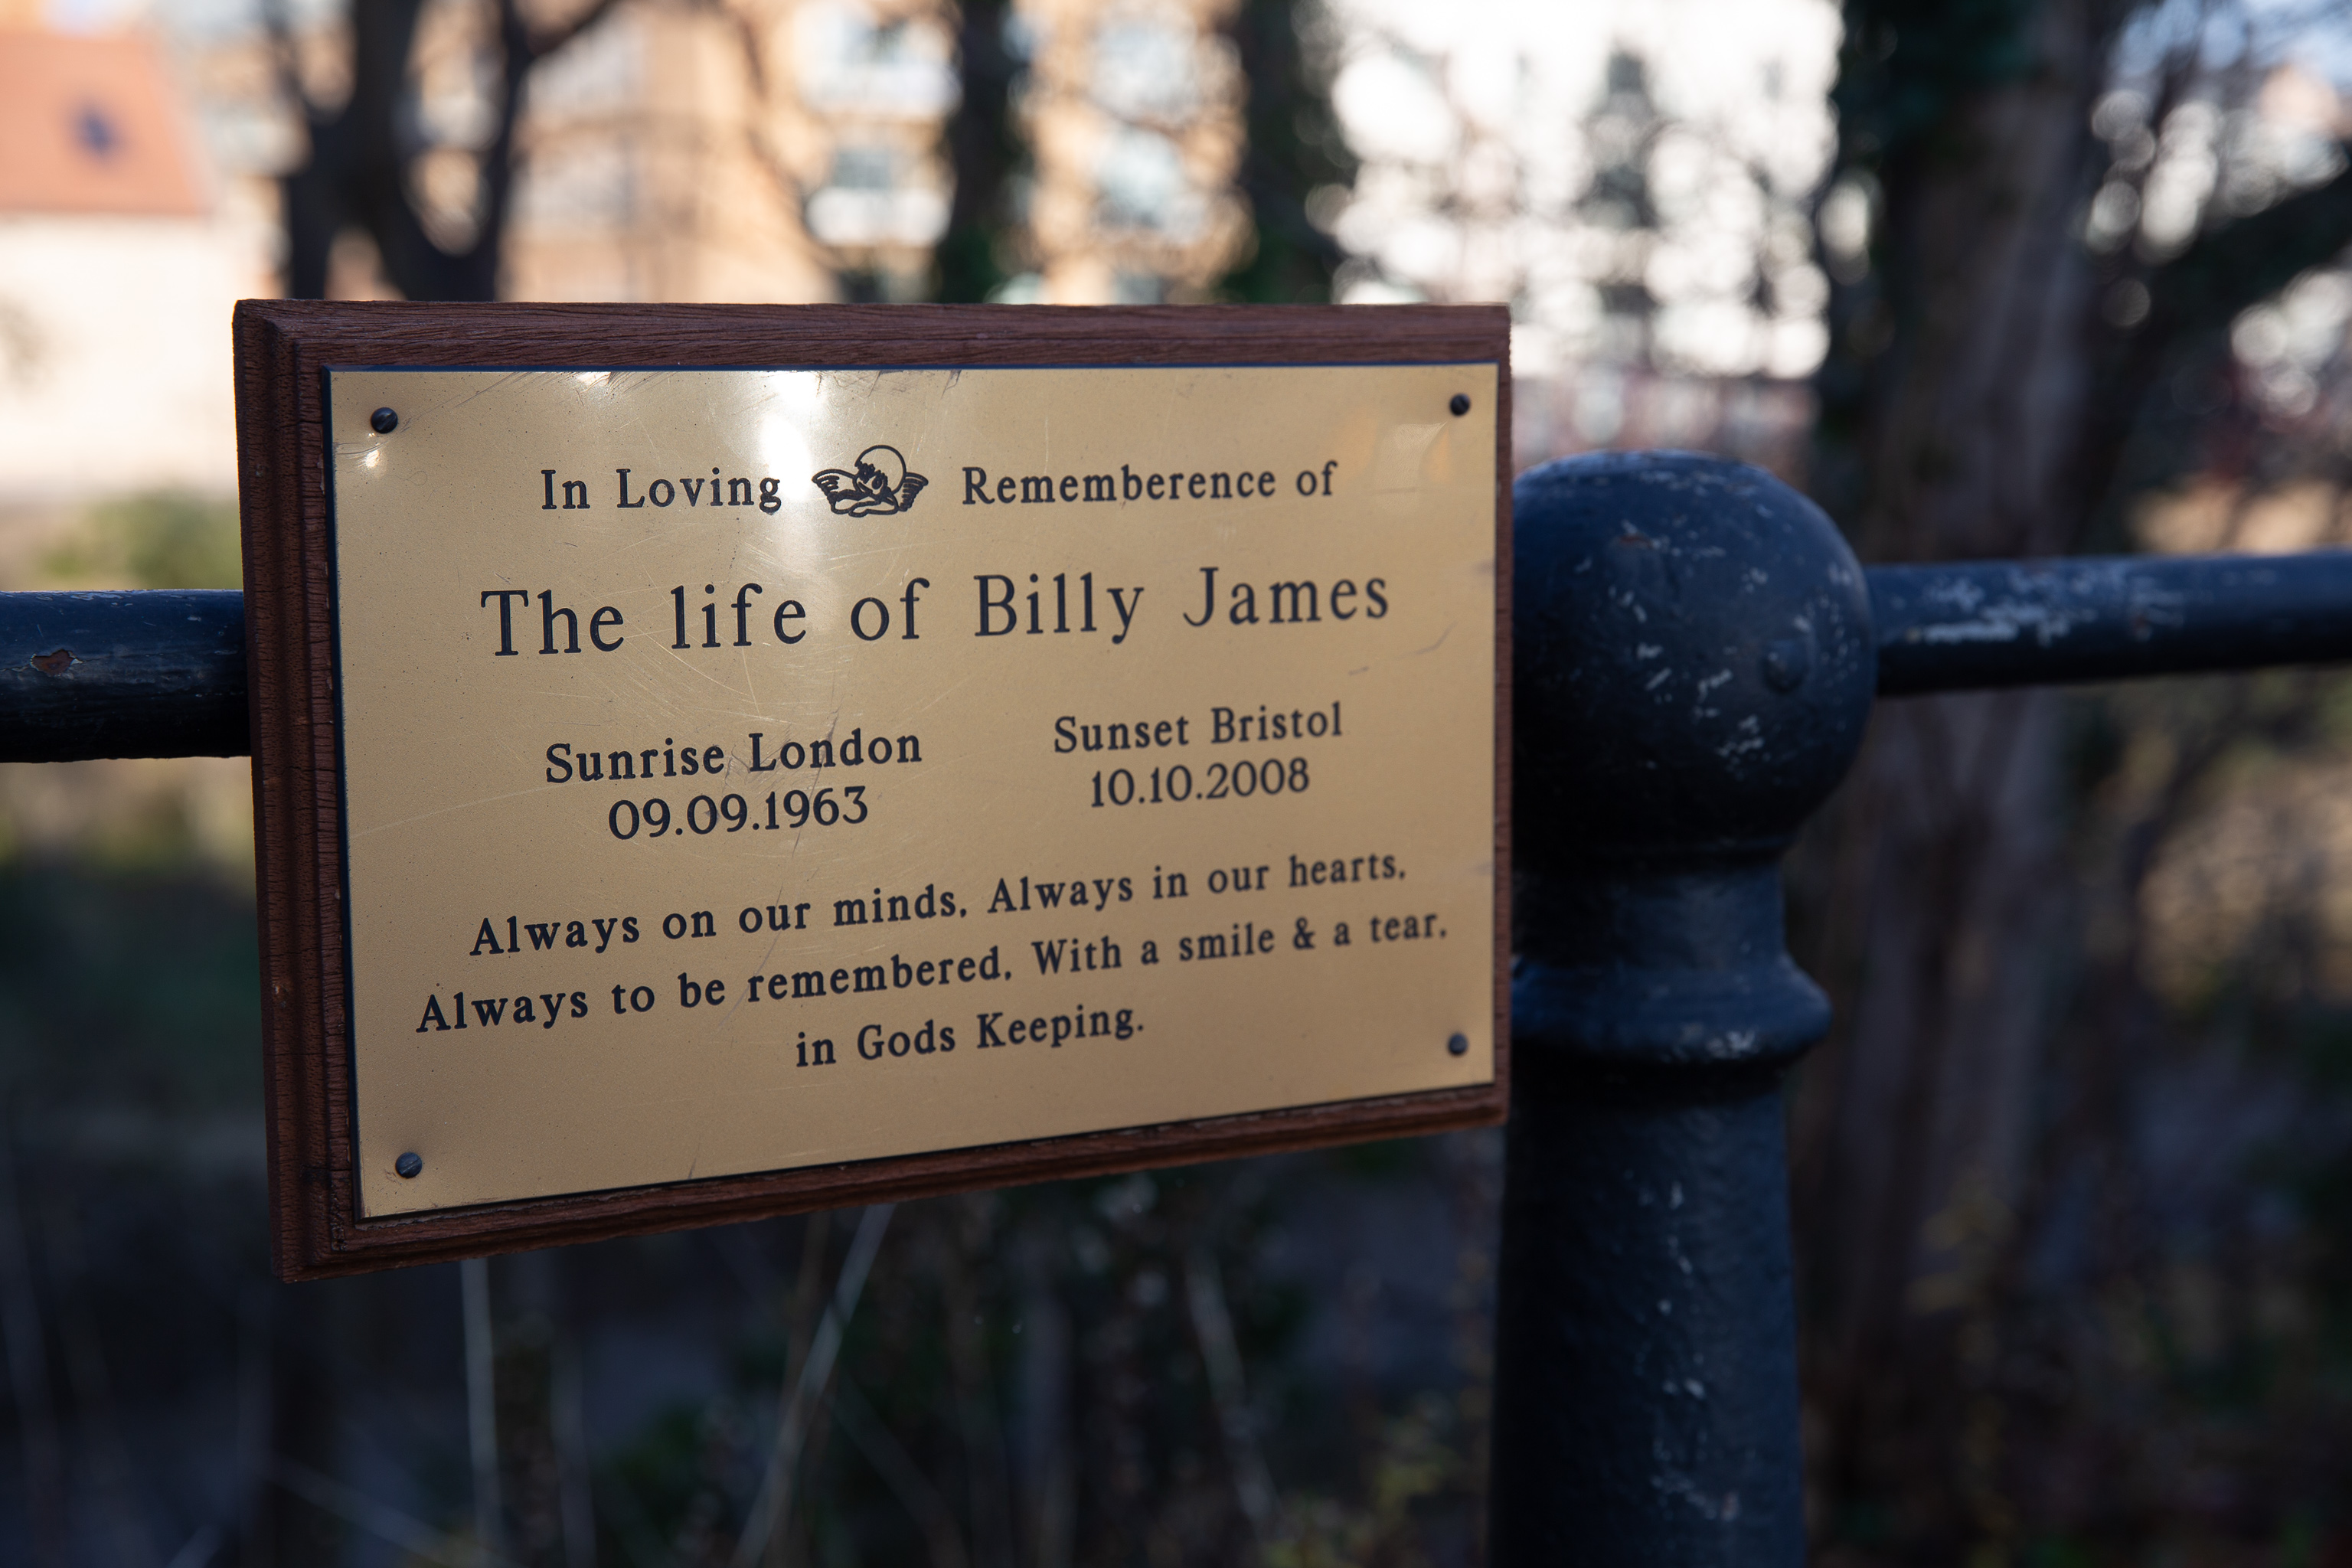 Billy James
Sobering. A couple of years younger than me, from what I can find on the web he died when his motorcycle was in collision with a car at the nearby...